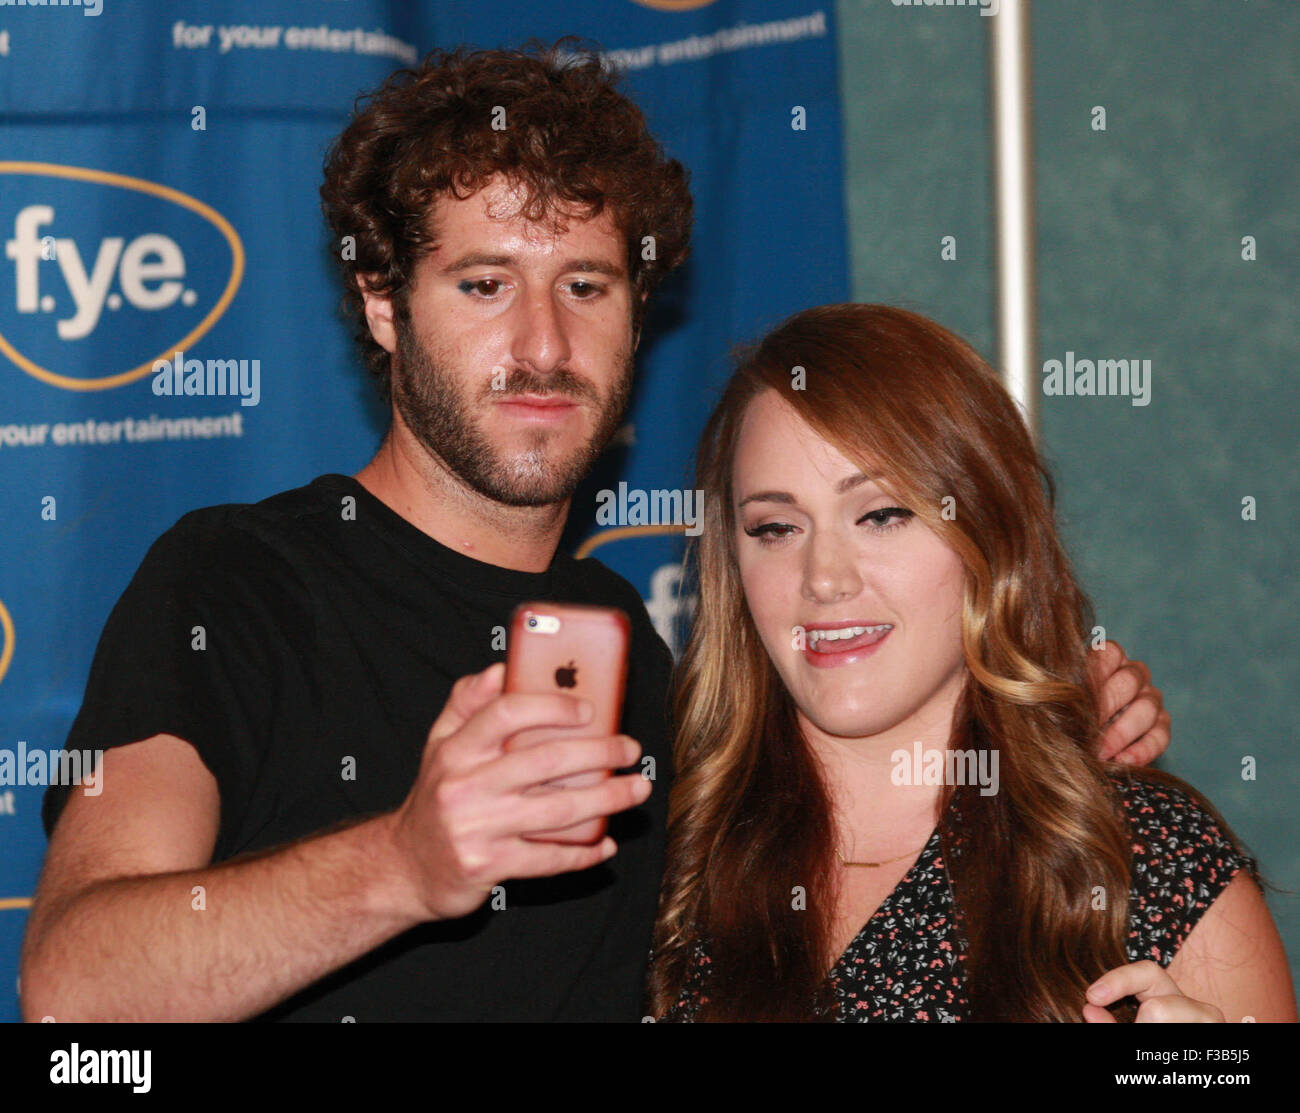 Rapper Lil Dicky signs copies of his new album 'Professional Rapper' at the  f.y.e. store in Philadelphia Featuring: Lil Dicky Where: Philadelphia,  Pennsylvania, United States When: 02 Aug 2015 Stock Photo - Alamy